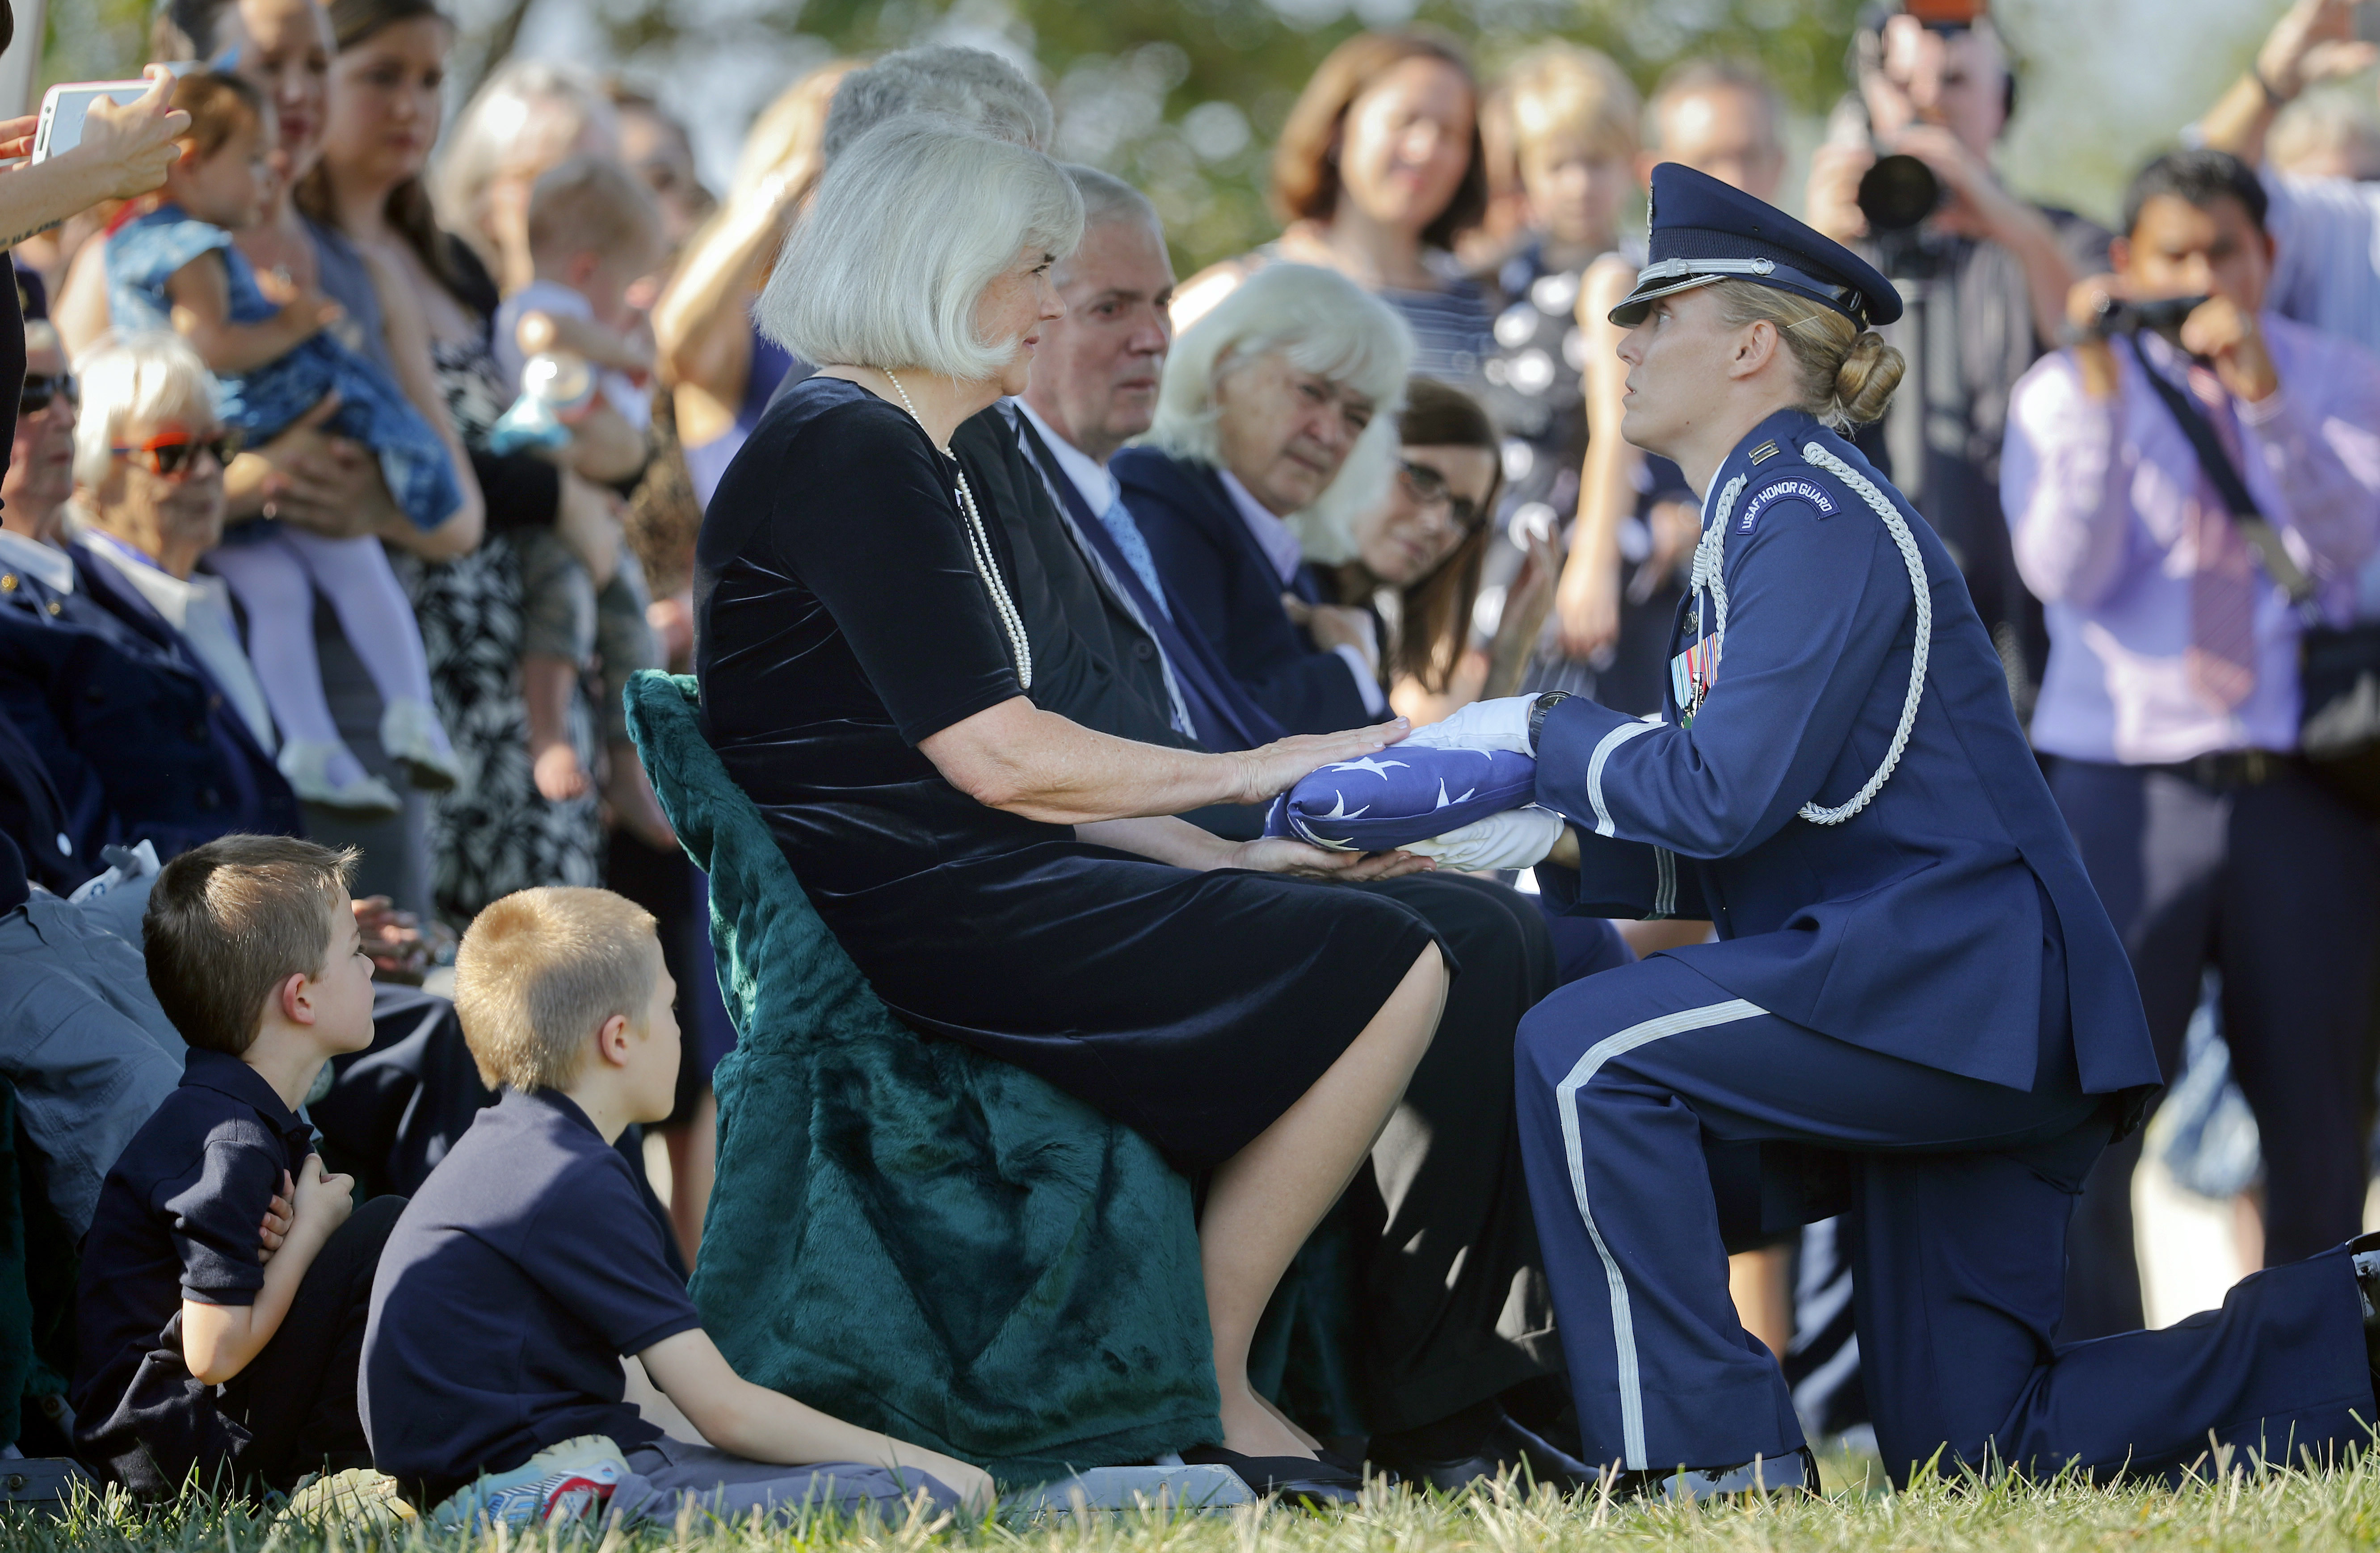 Air Force Capt. Jennifer Lee, right, kneels as she presents an American flag to Terry Harmon, center seated, daughter of World War II pilot Elaine Danforth Harmon, during burial services, Wednesday, Sept. 7, 2016 at Arlington National Cemetery in Arlington, Va. It took an act of Congress, but Harmon was finally laid to rest on at Arlington National Cemetery, she died last year at age 95. She was one of the Women Airforce Service Pilots (WASP), a group of women who flew military aircraft on noncombat missions during World War II so that men were freed up for combat. (AP Photo/Pablo Martinez Monsivais)